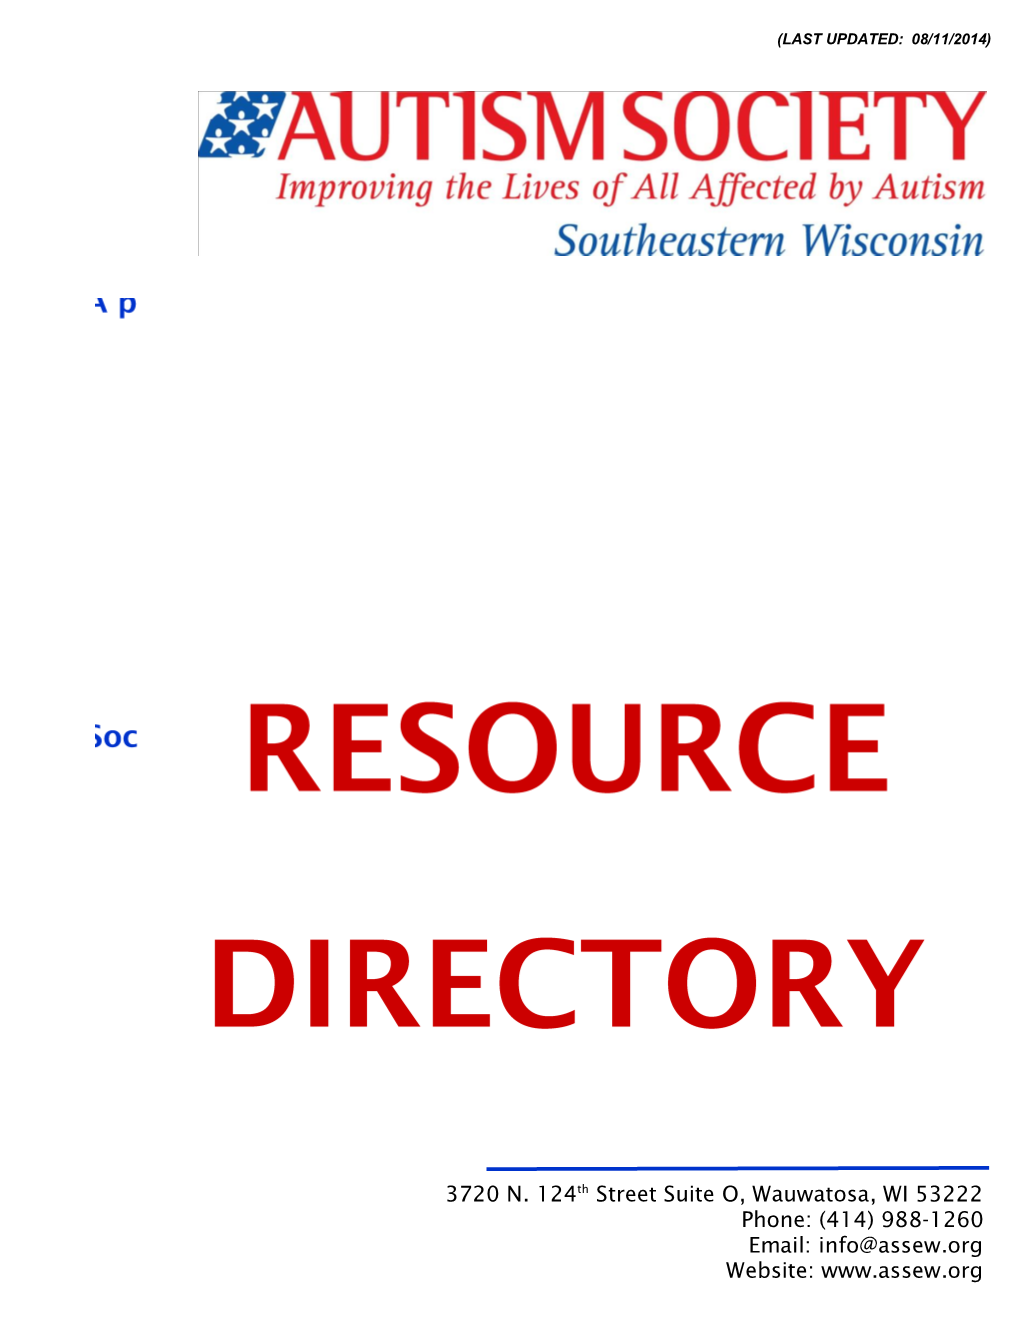 Autism Resources for Southeast Wisconsin